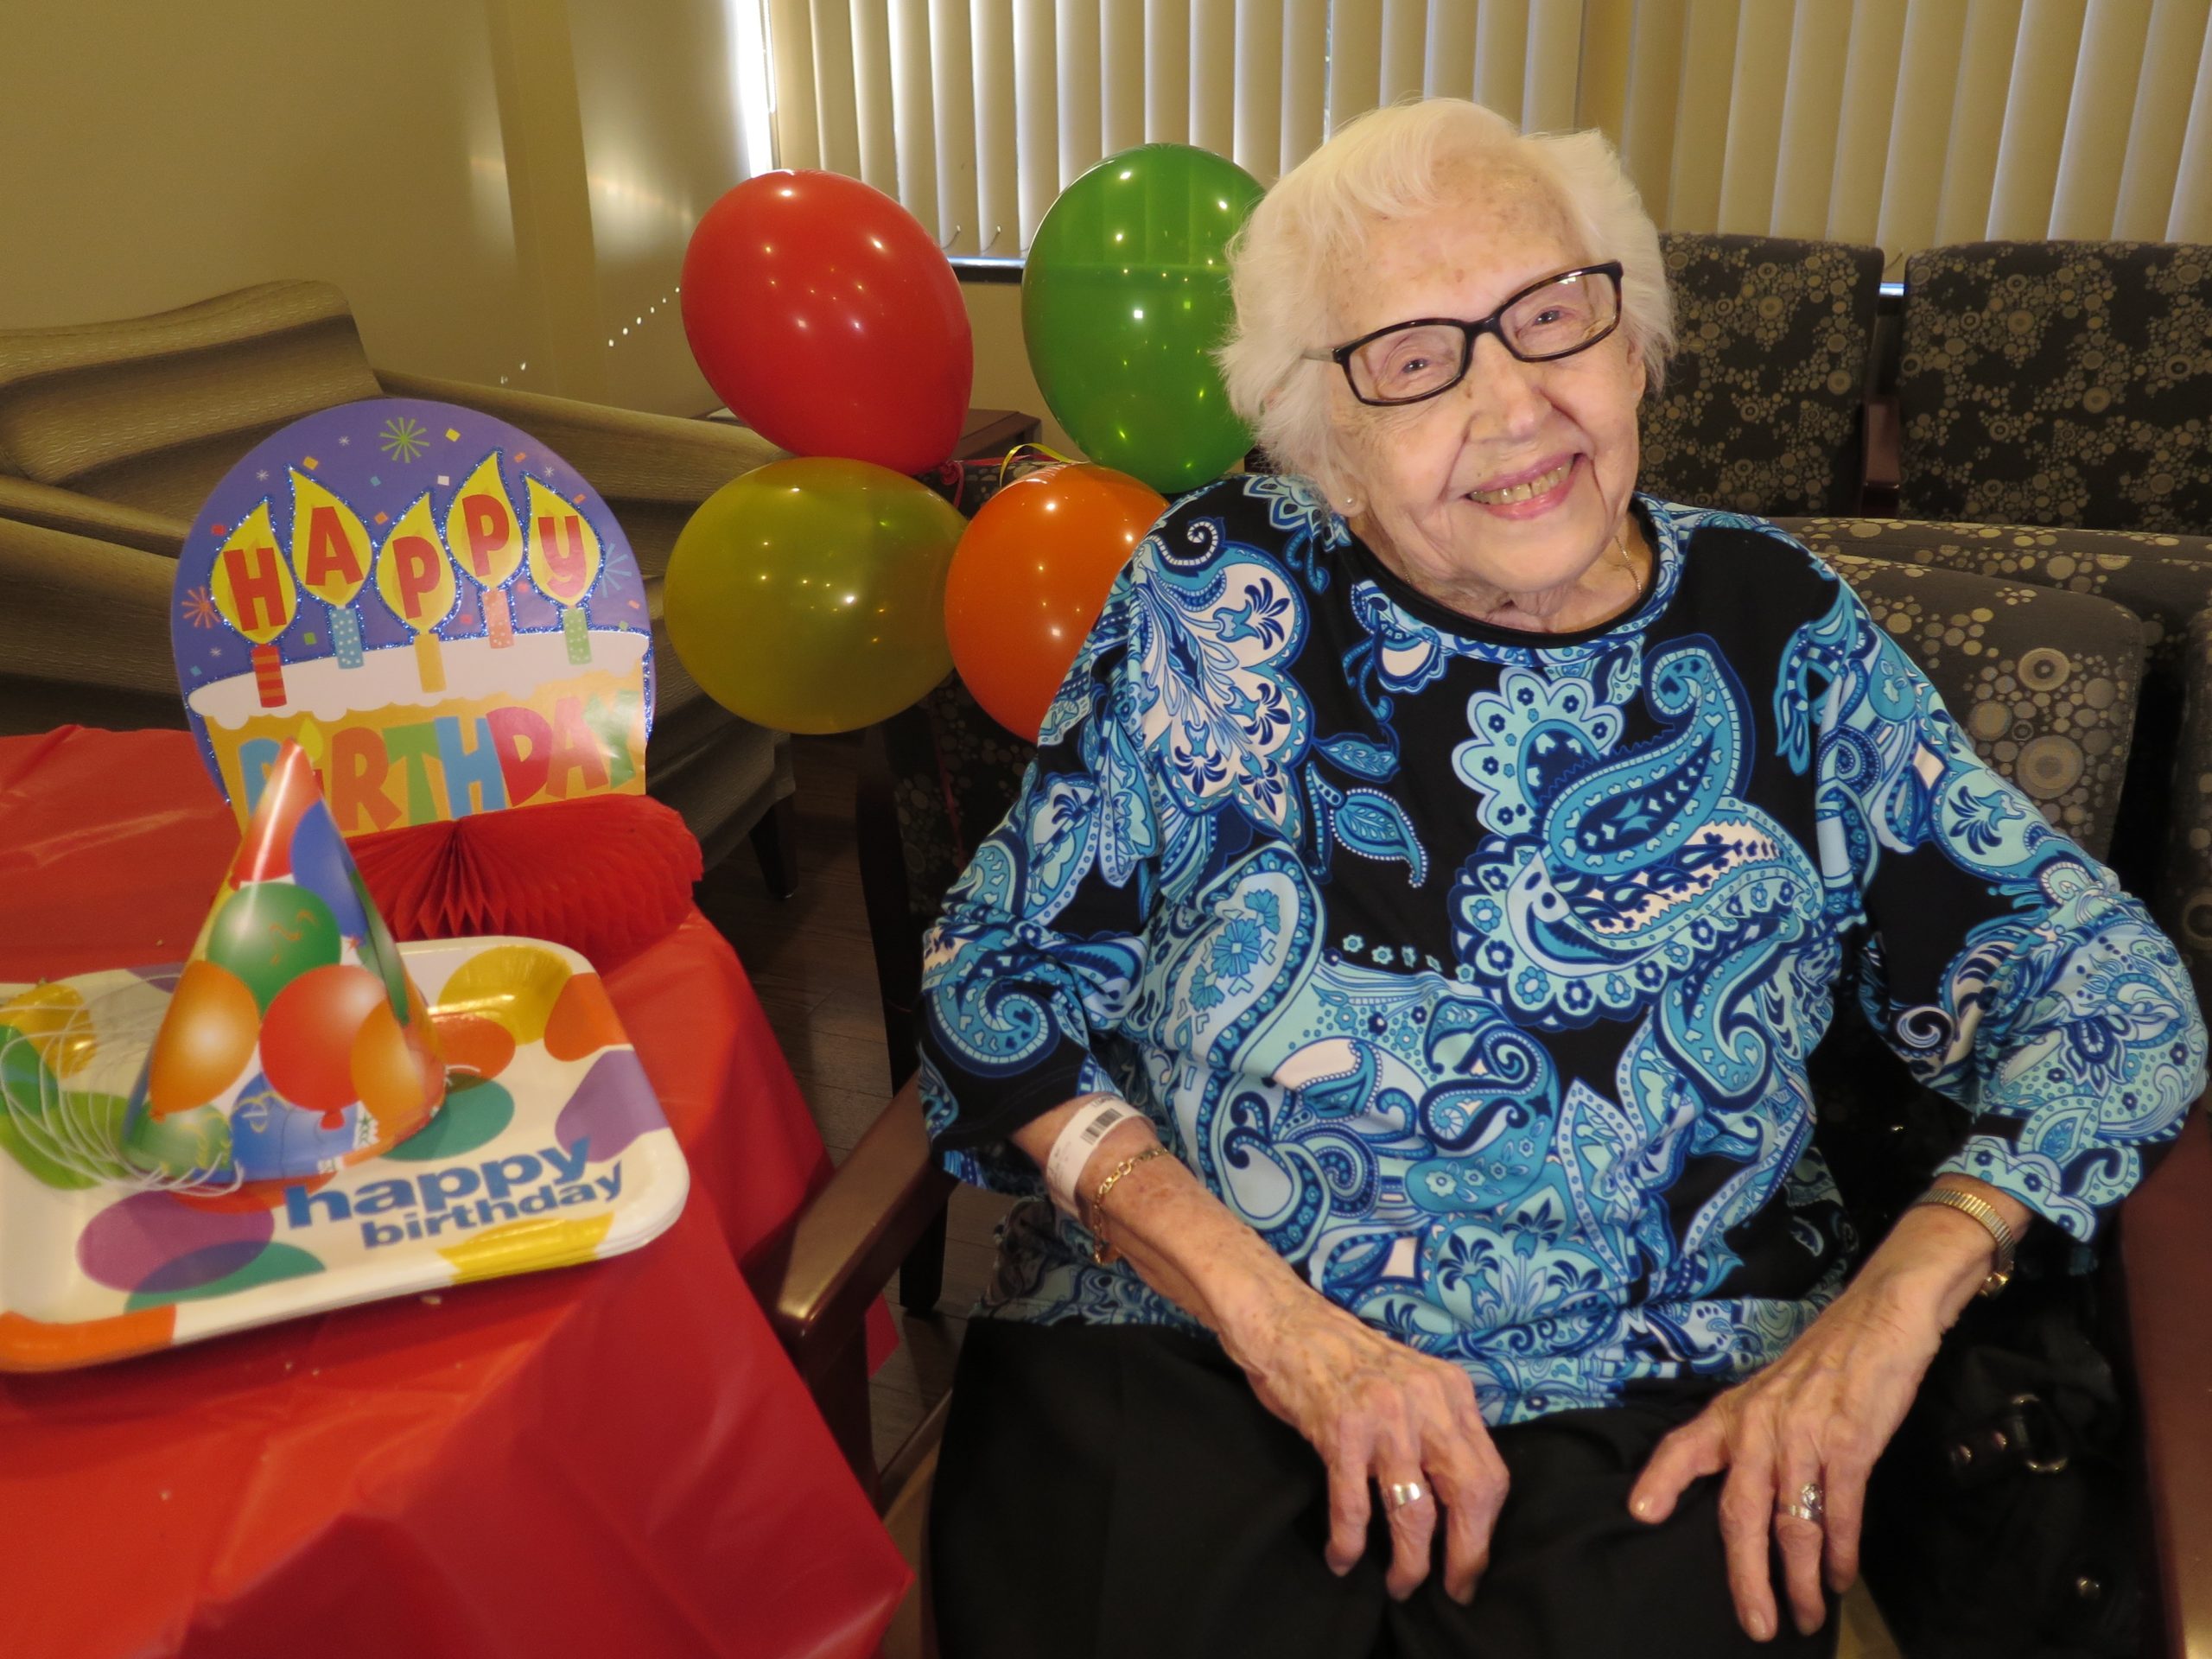 99-year-old patient posing with birthday decorations